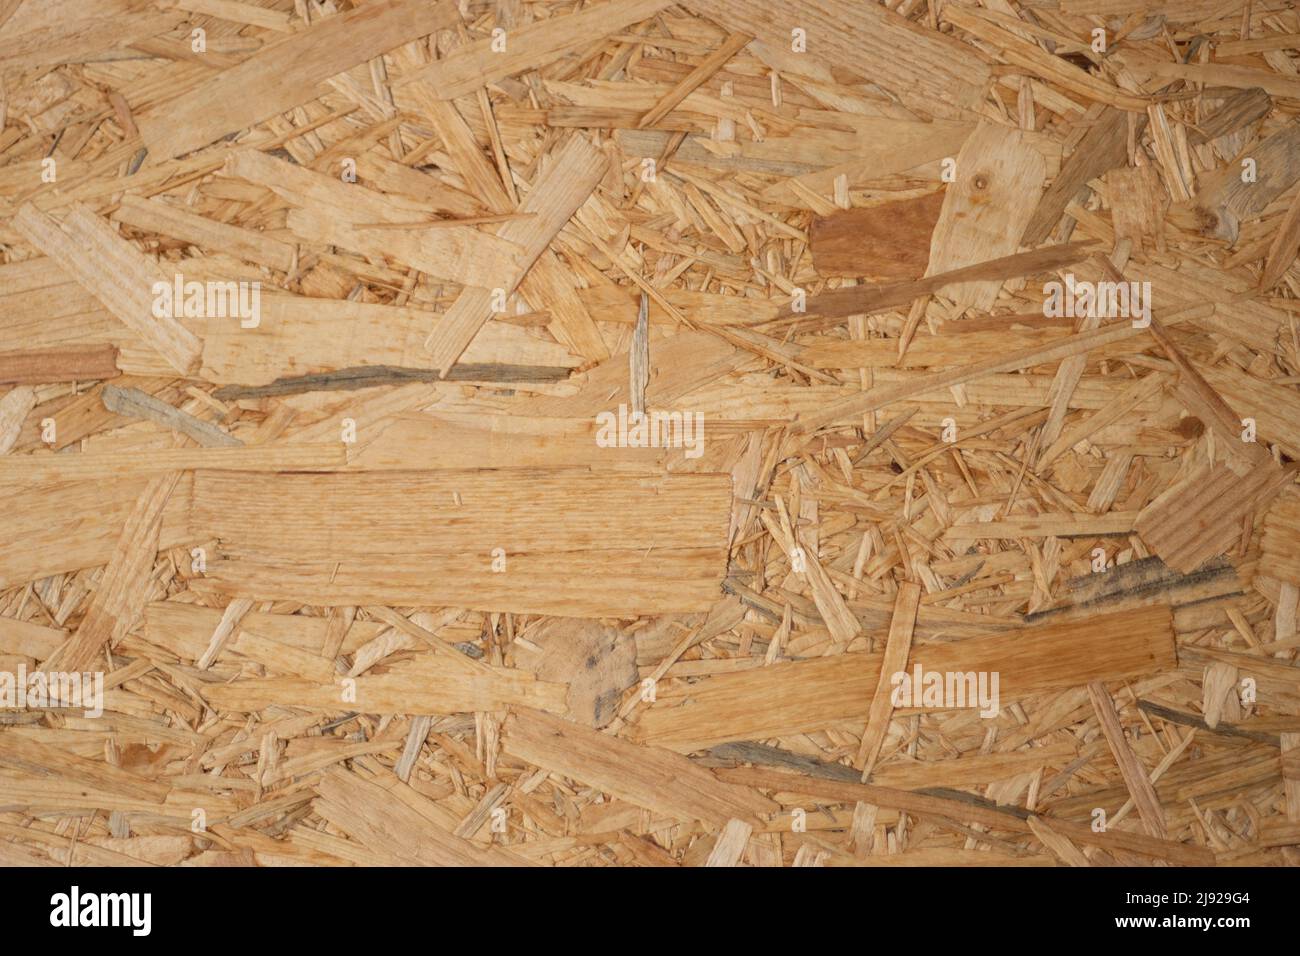 Photo of construction material, close up wood chips pattern. Stock Photo